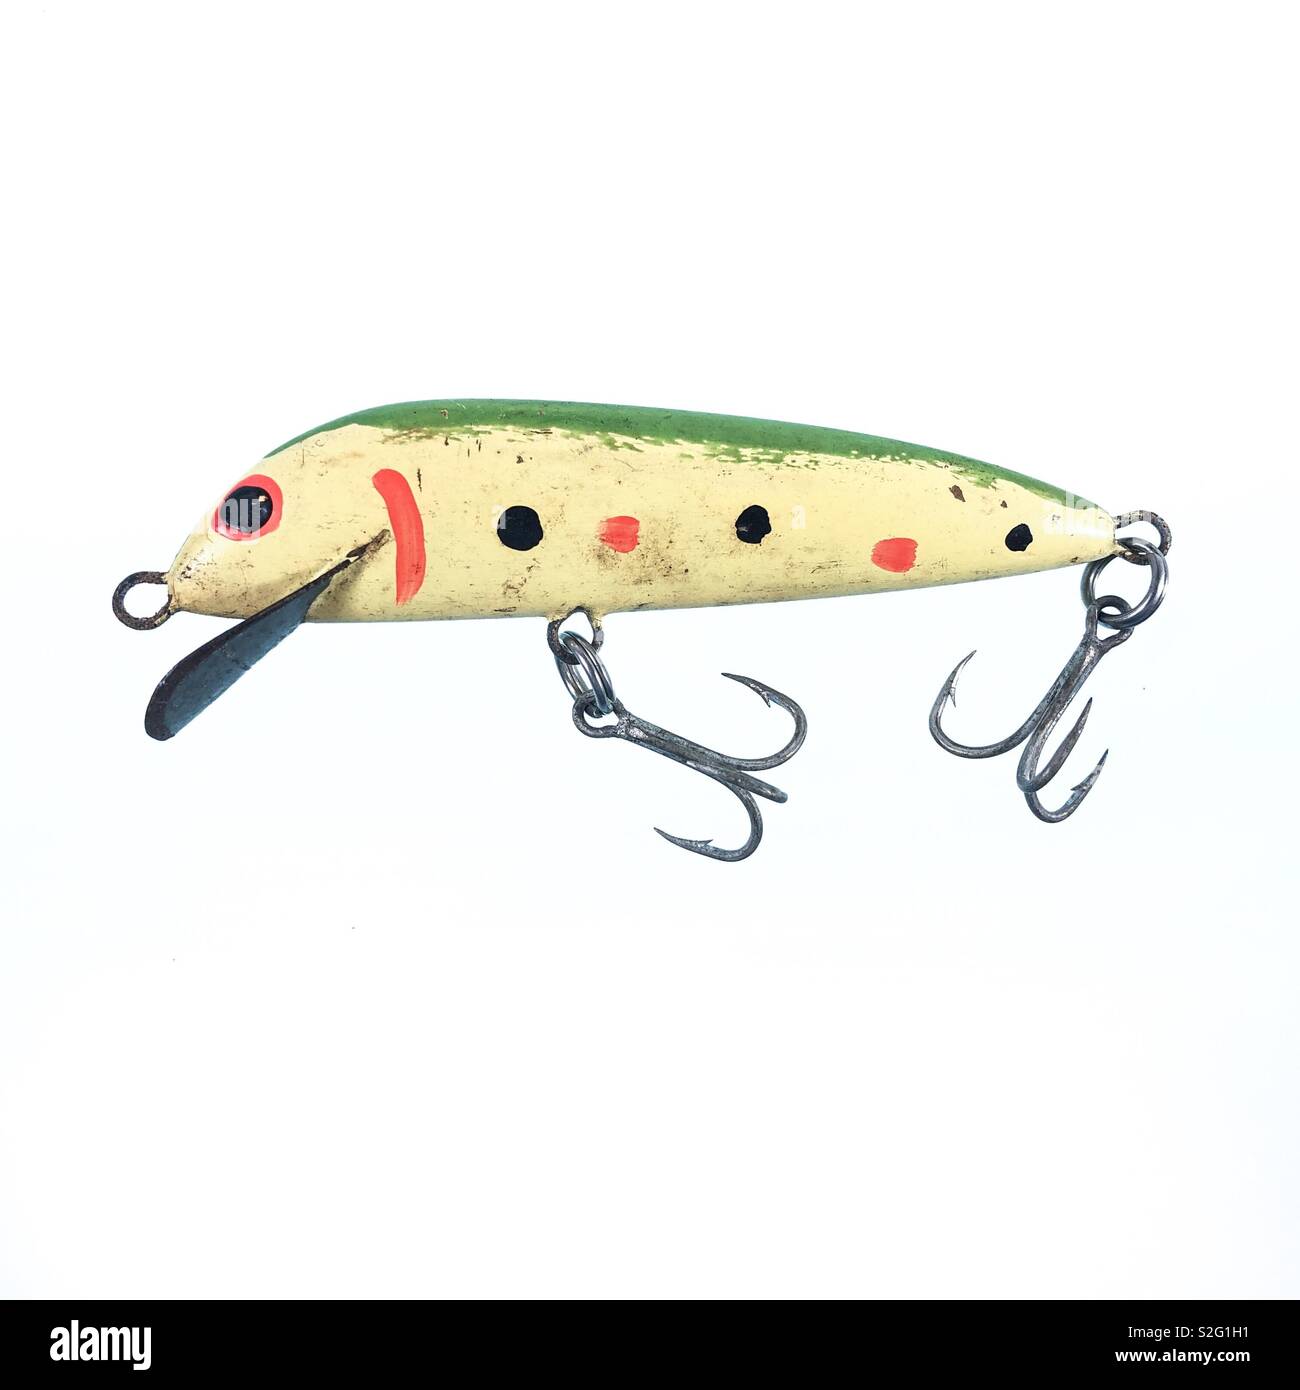 https://c8.alamy.com/comp/S2G1H1/handmade-timber-fishing-lure-from-the-1960s-made-in-australia-S2G1H1.jpg